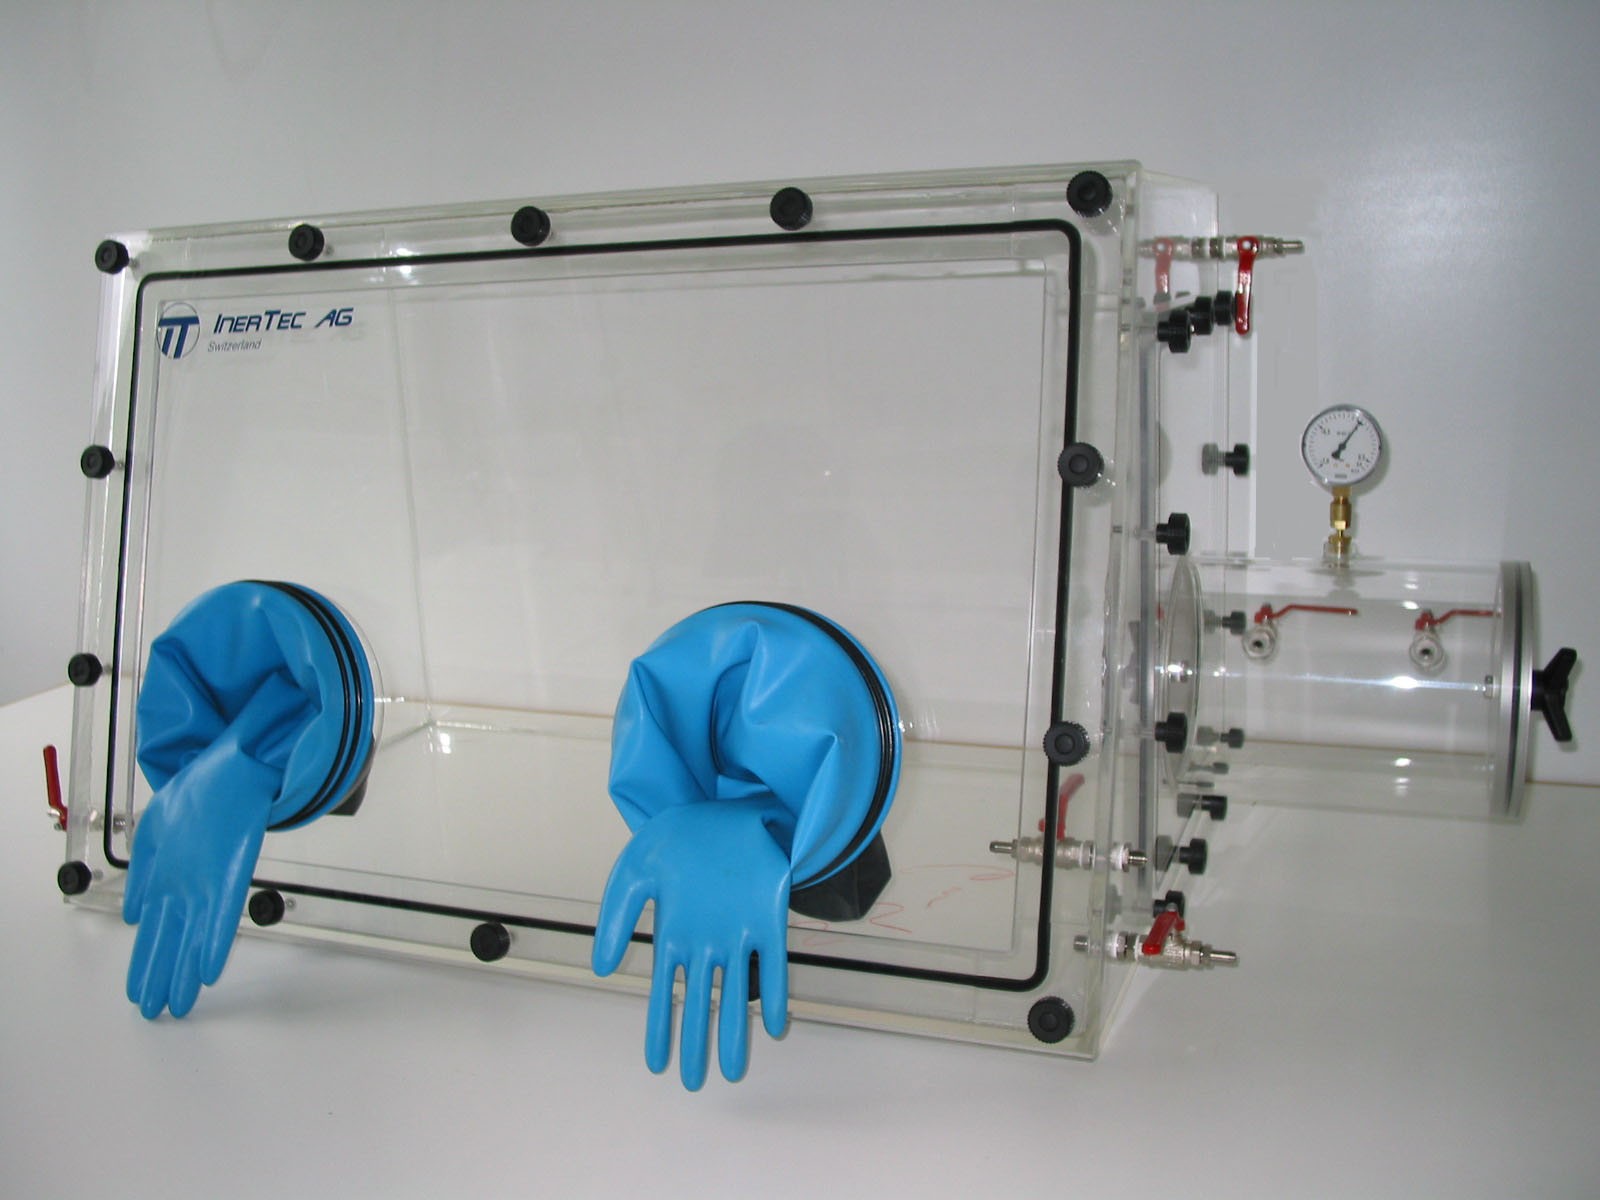 Glovebox made of acrylic&gt; Gas filling: automatic flushing with pressure control, front version: removable, side version: round vacuum lock, control: oxygen regulator and humidity display with data logger